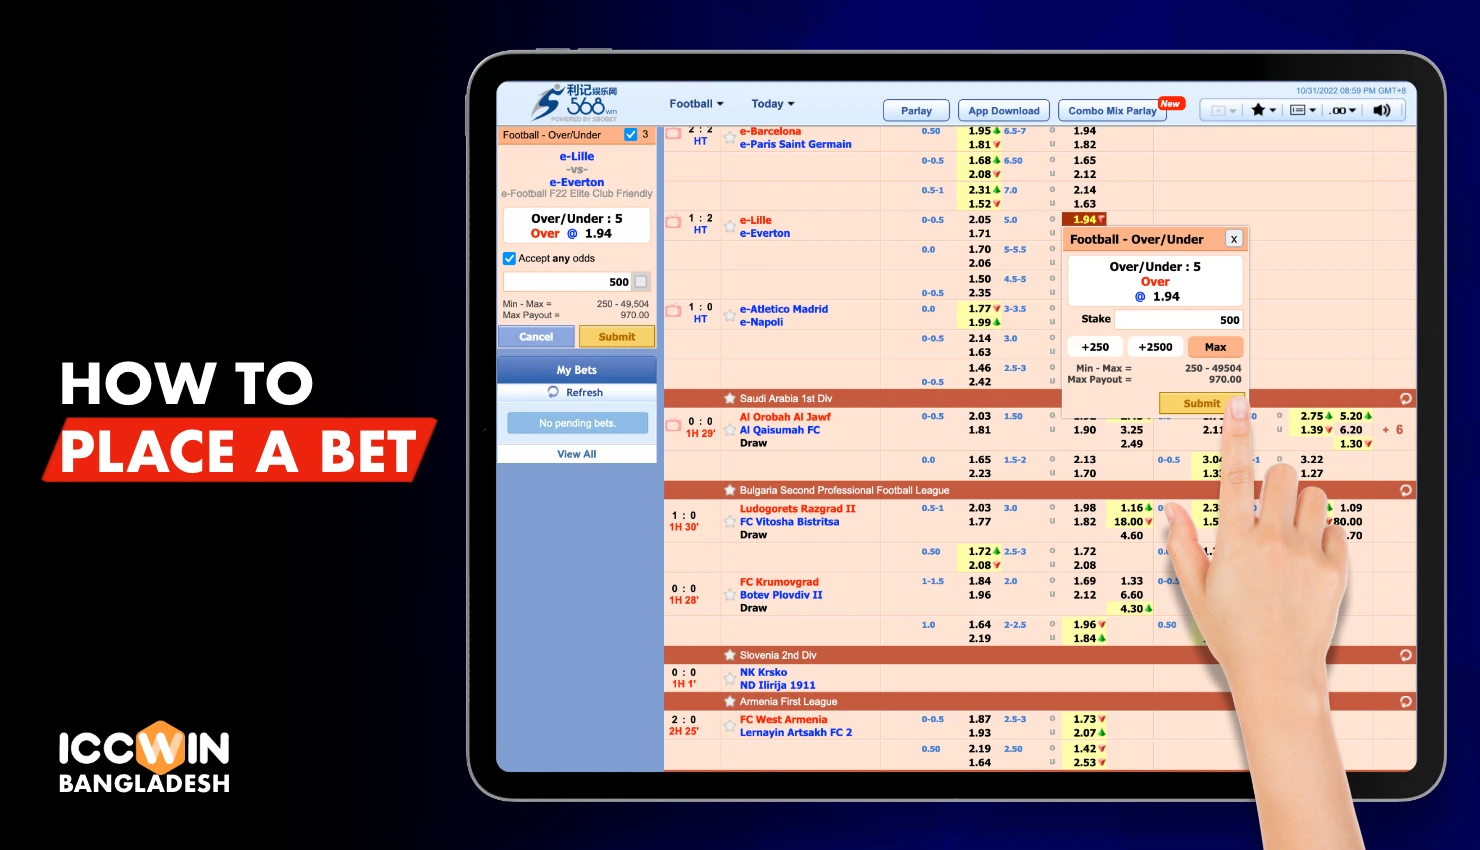 In order to place a bet on the Iccwin platform, you need to fulfill a few simple conditions